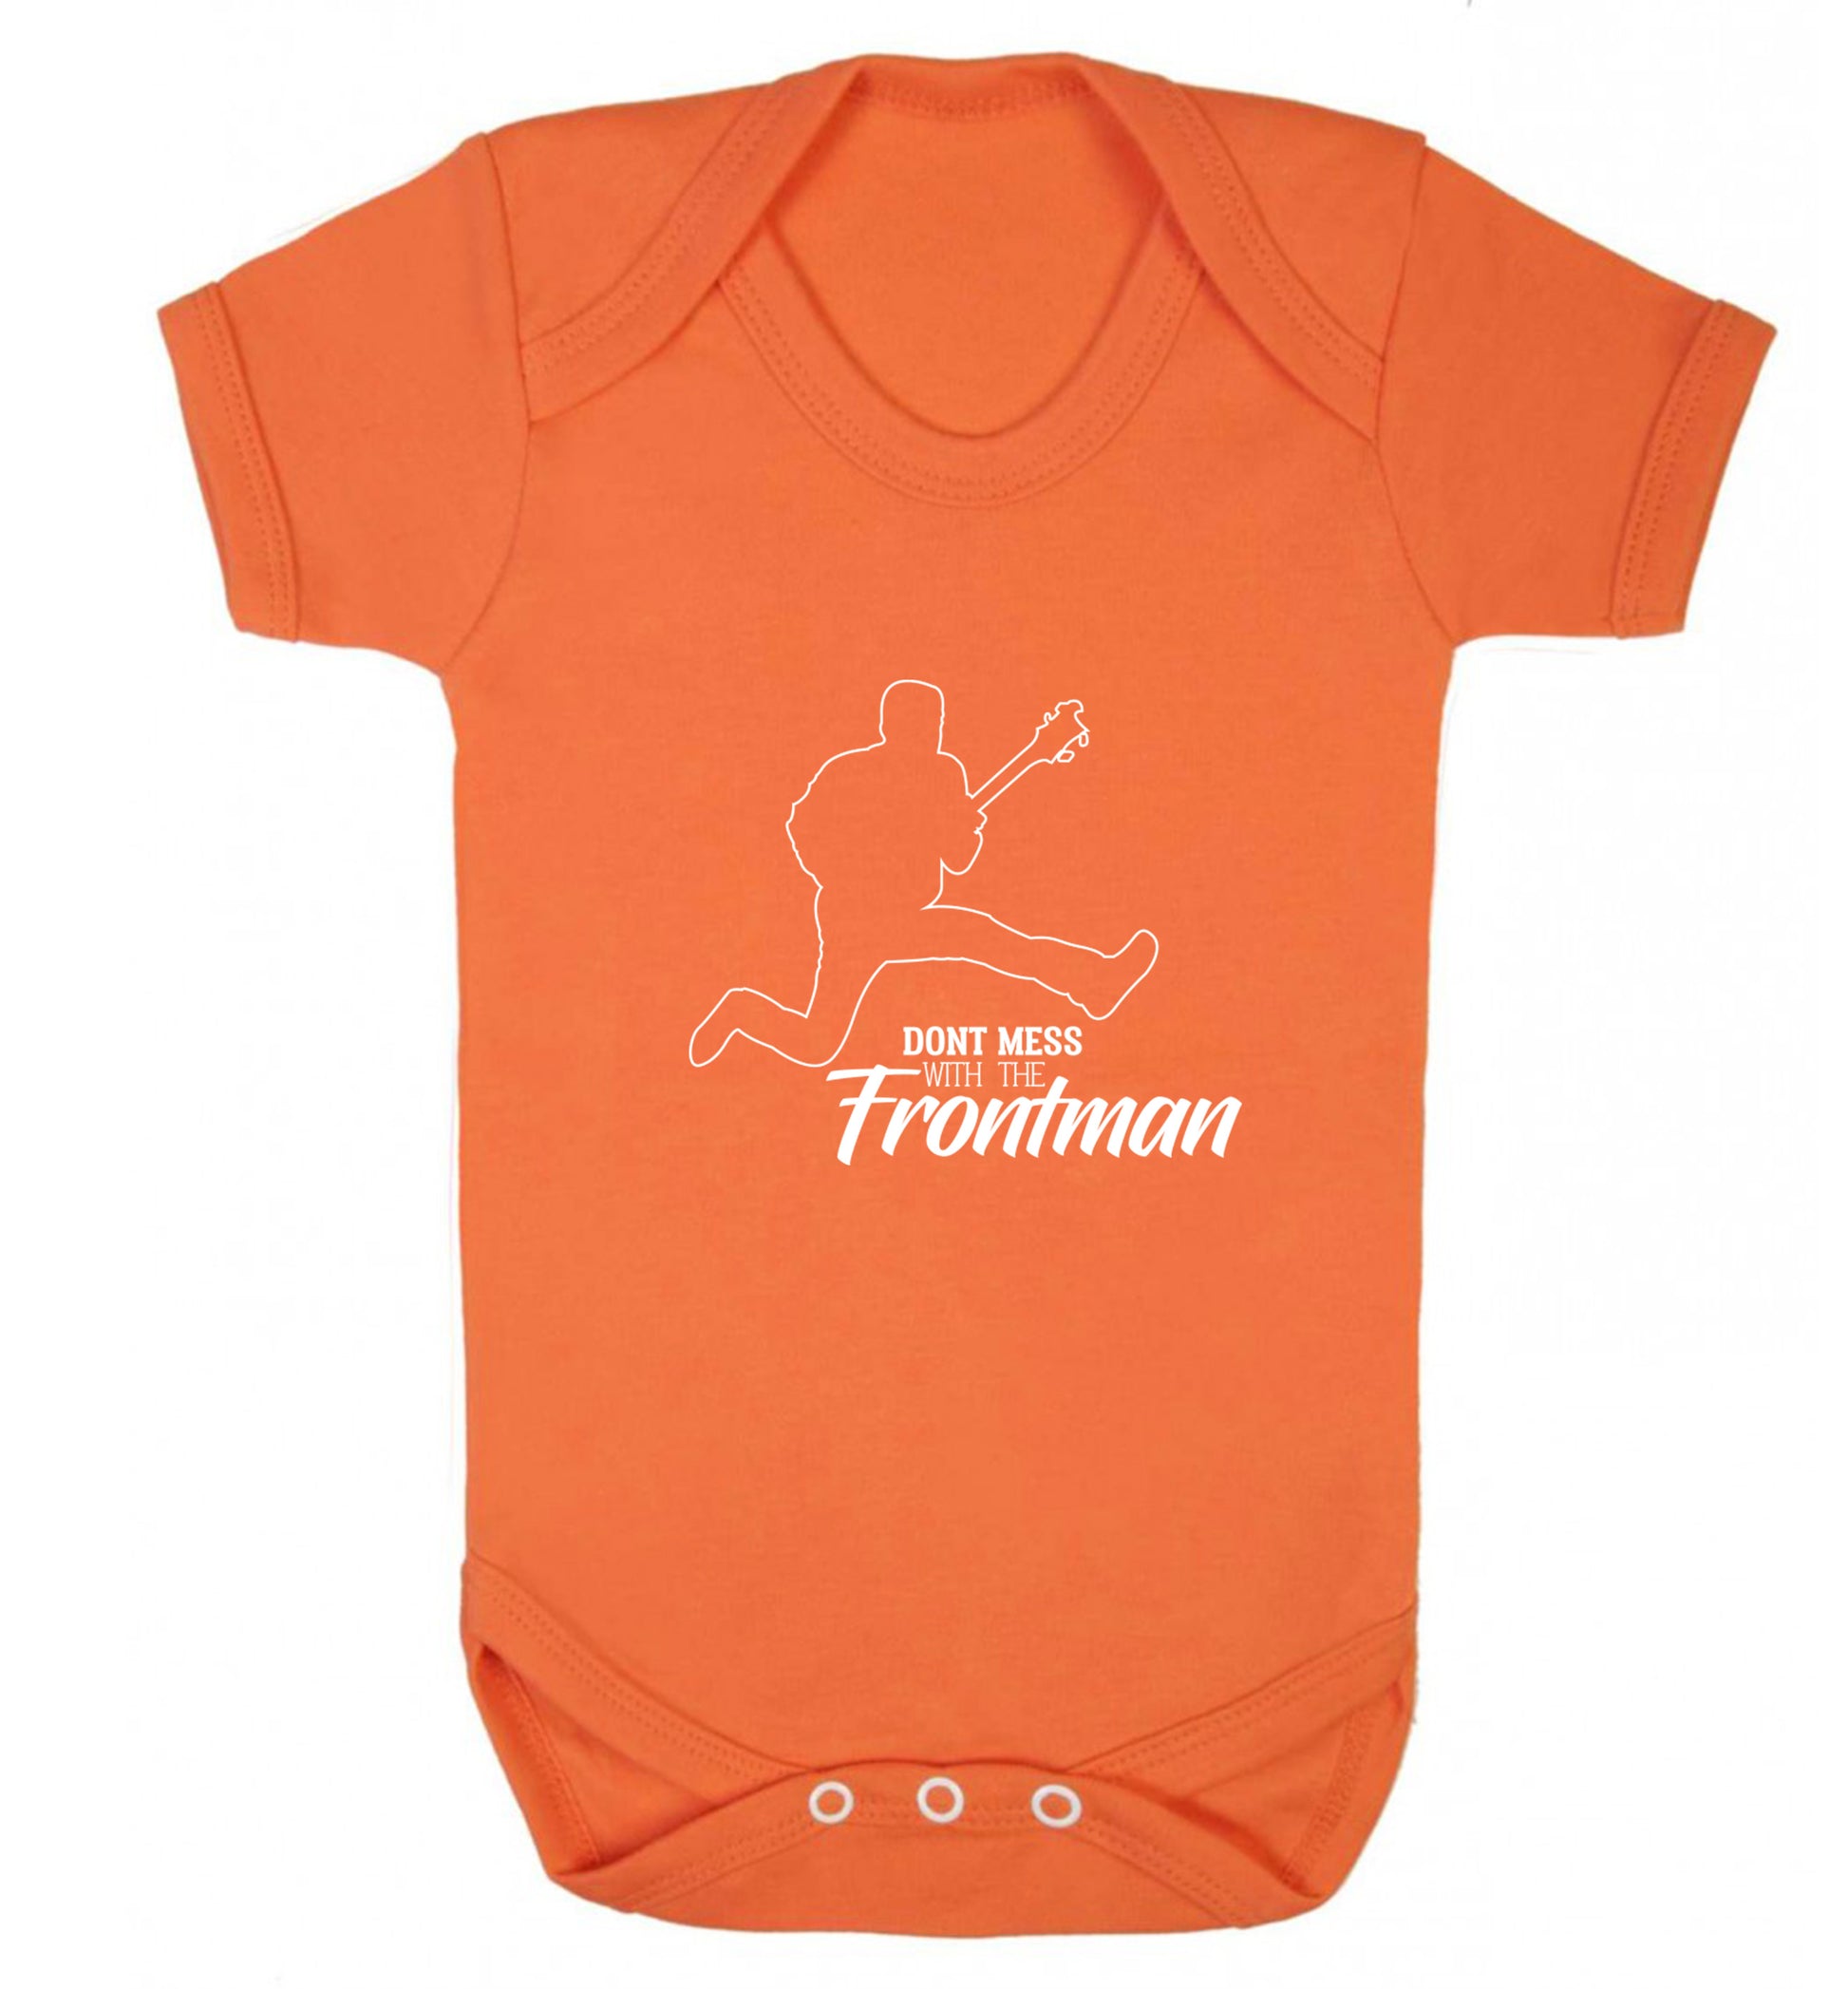 Don't mess with the frontman Baby Vest orange 18-24 months